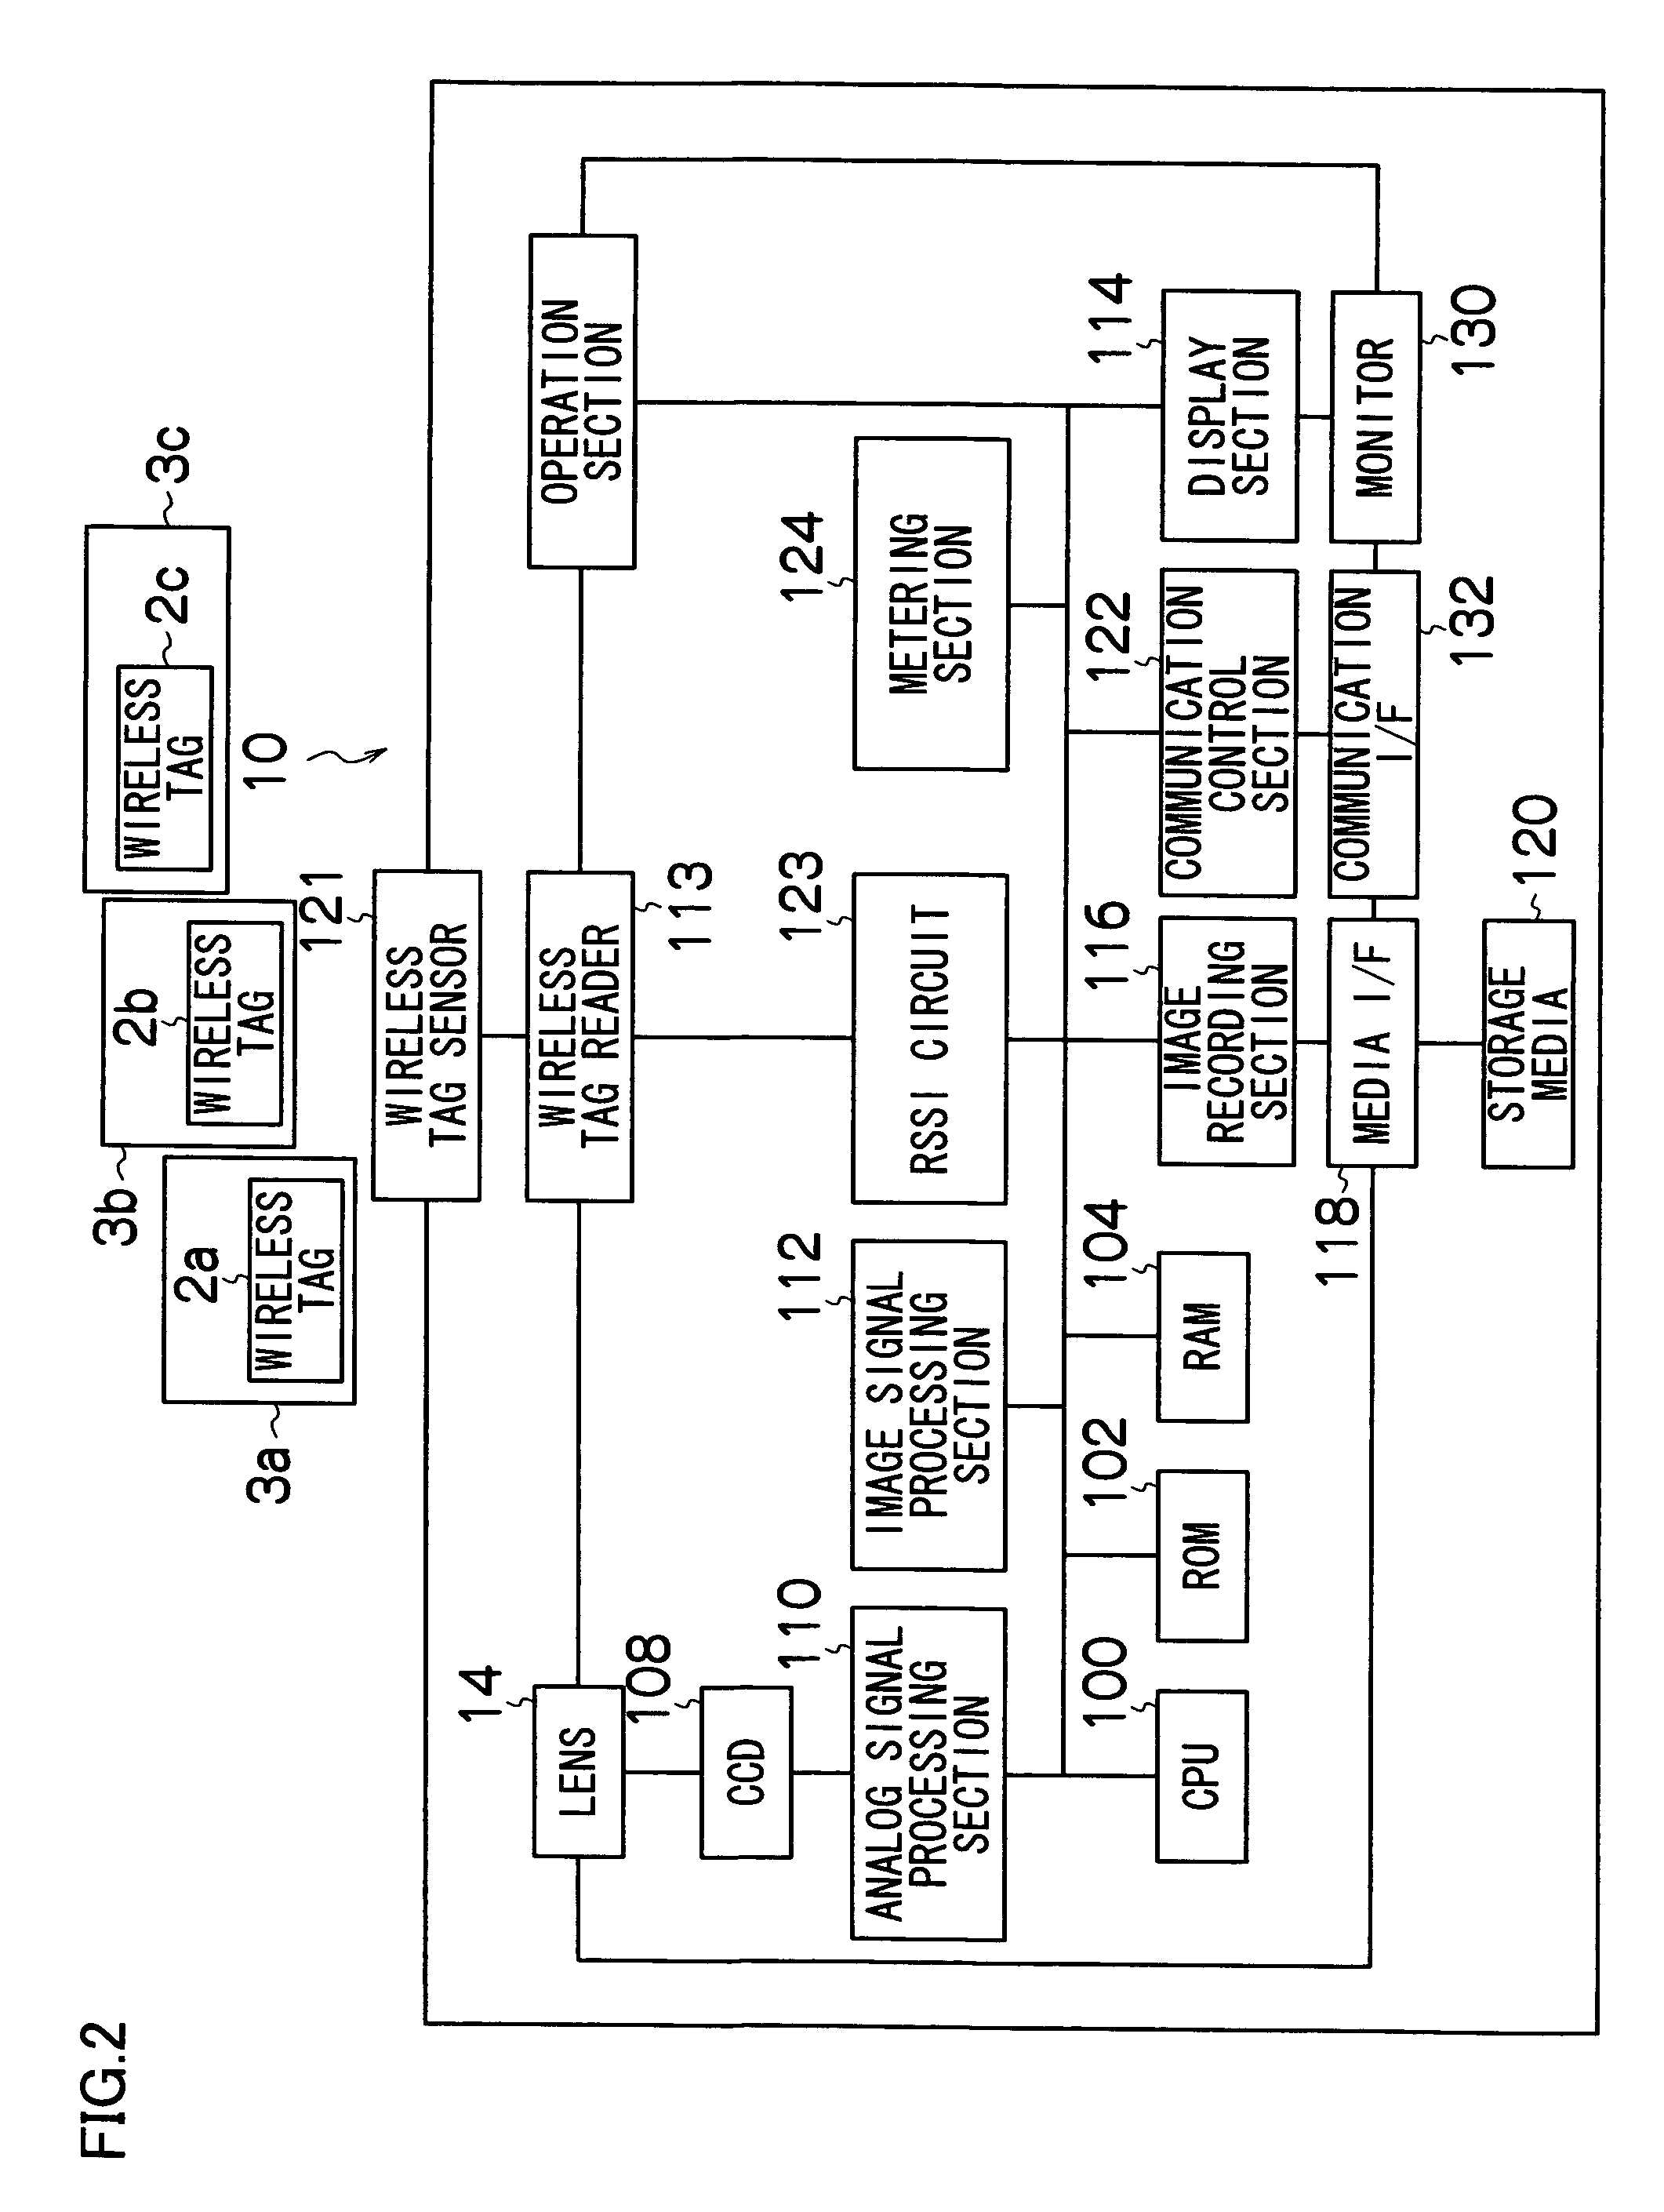 Image searching apparatus, image printing apparatus, print ordering system, over-the-counter printing terminal apparatus, image capturing apparatus, image searching program and method